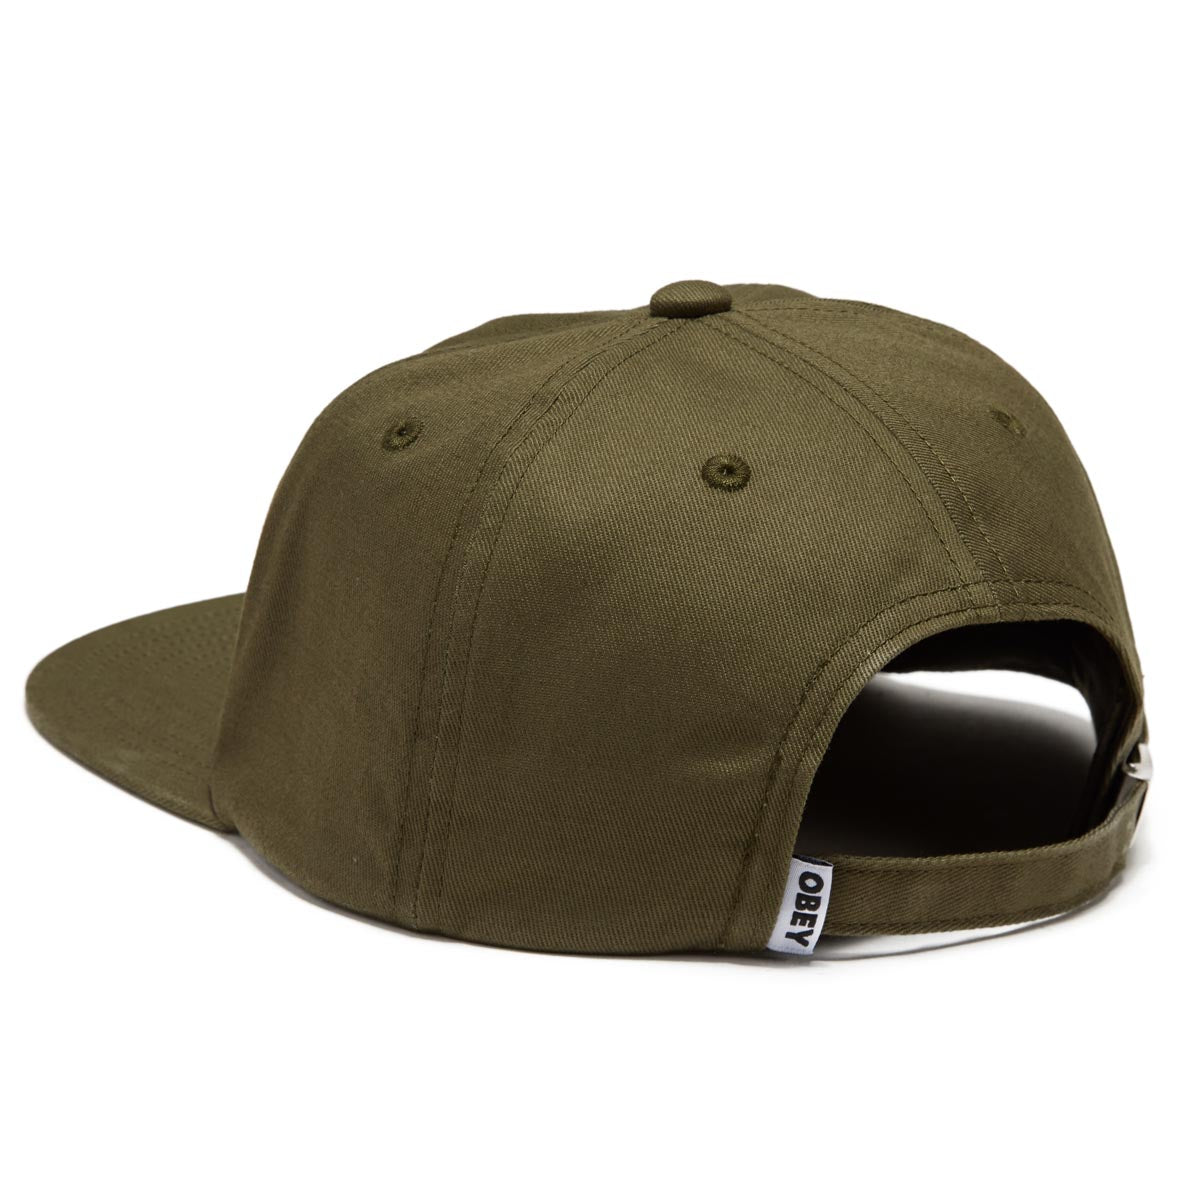 Obey Icon Patch Panel Strapback Hat - Army image 2